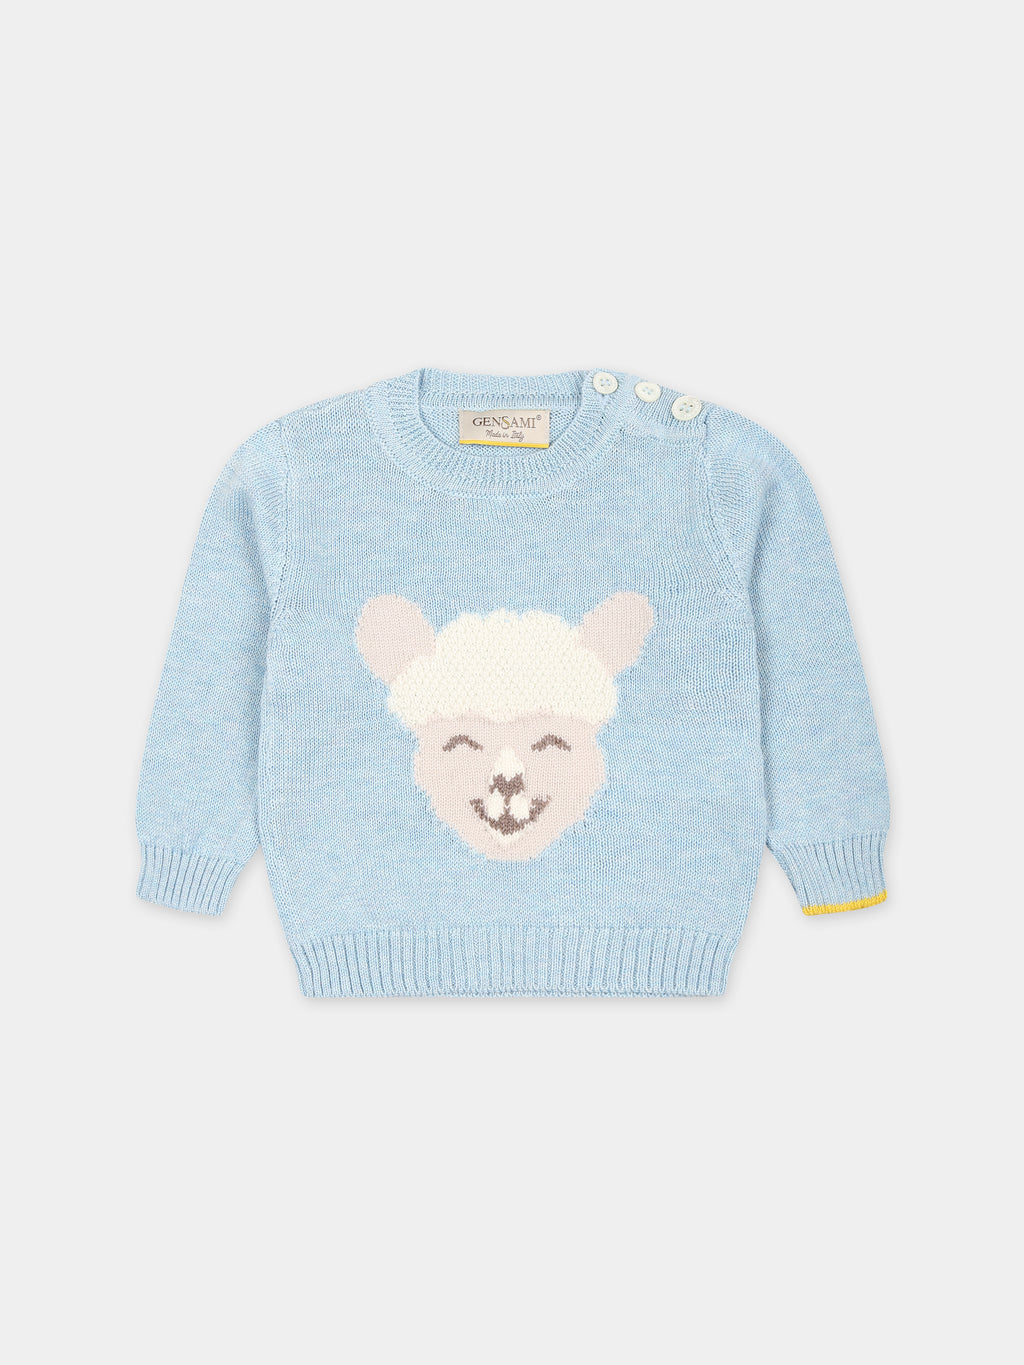 Light blue sweater for baby boy with alpachino